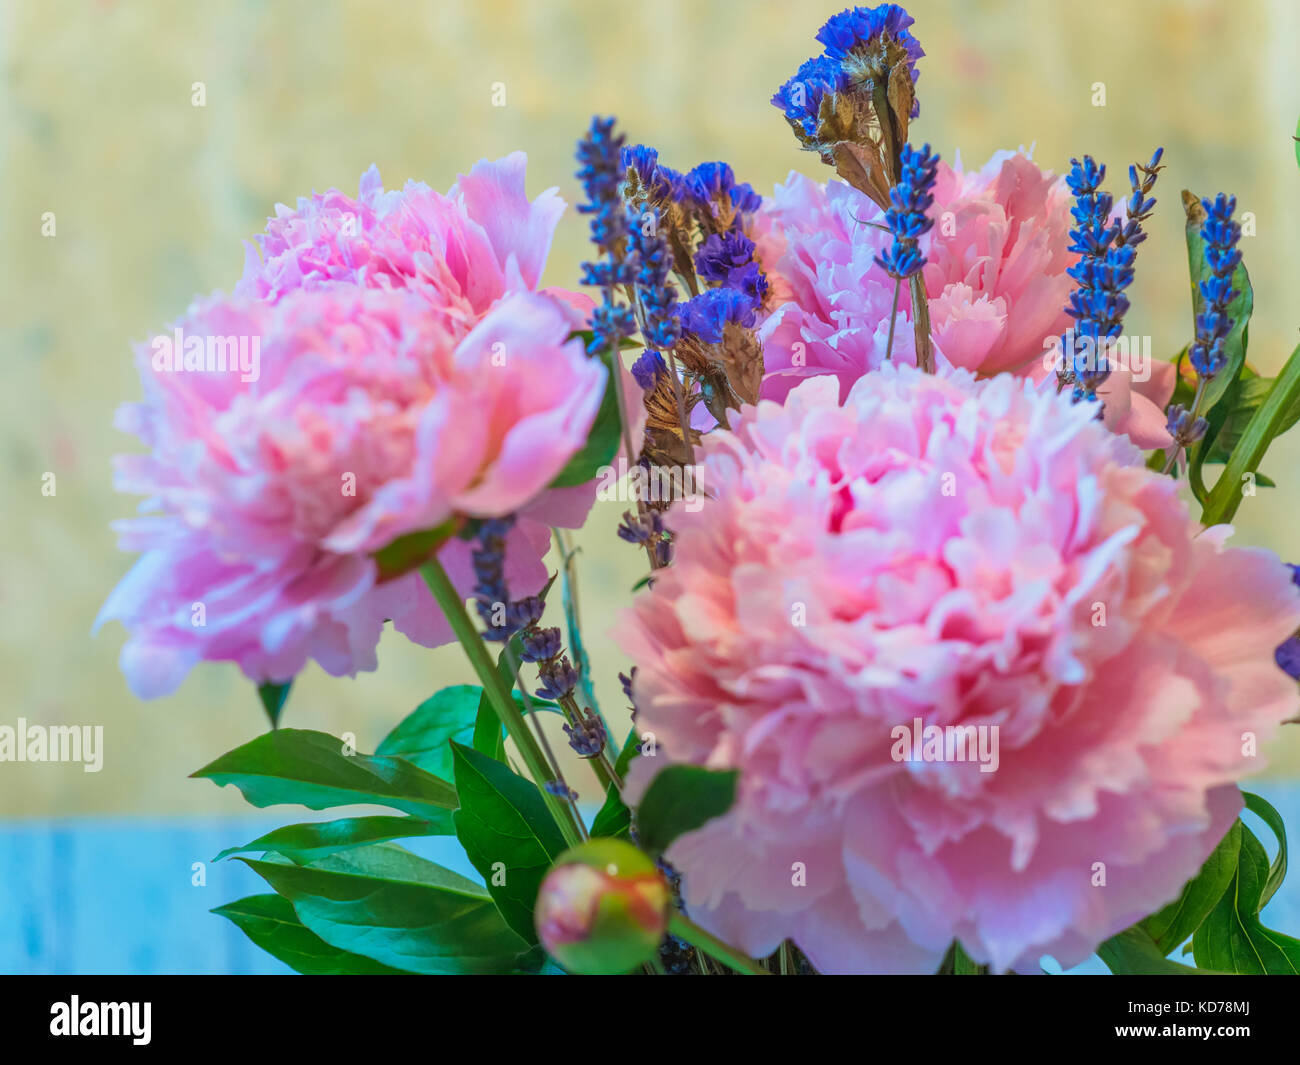 A bouquet of beautiful pink peony and lavender flowers against blurred background. Stock Photo